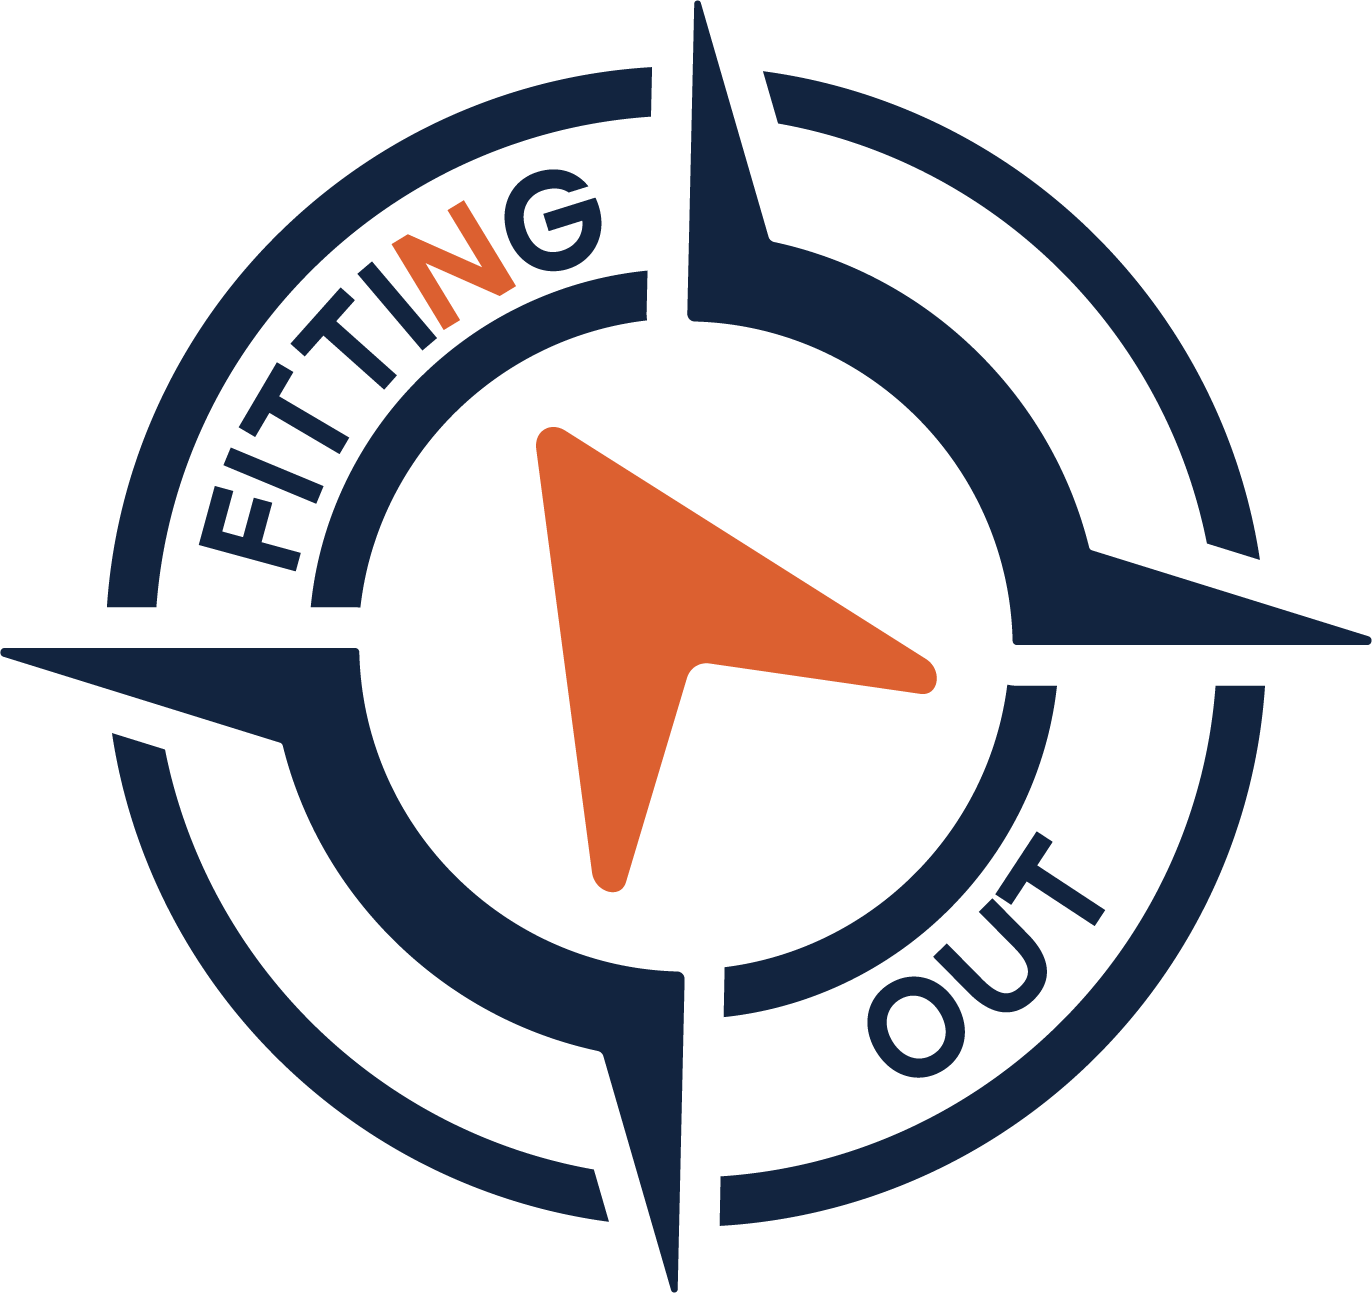 The Fitting Out Podcast by Jonah McGuire